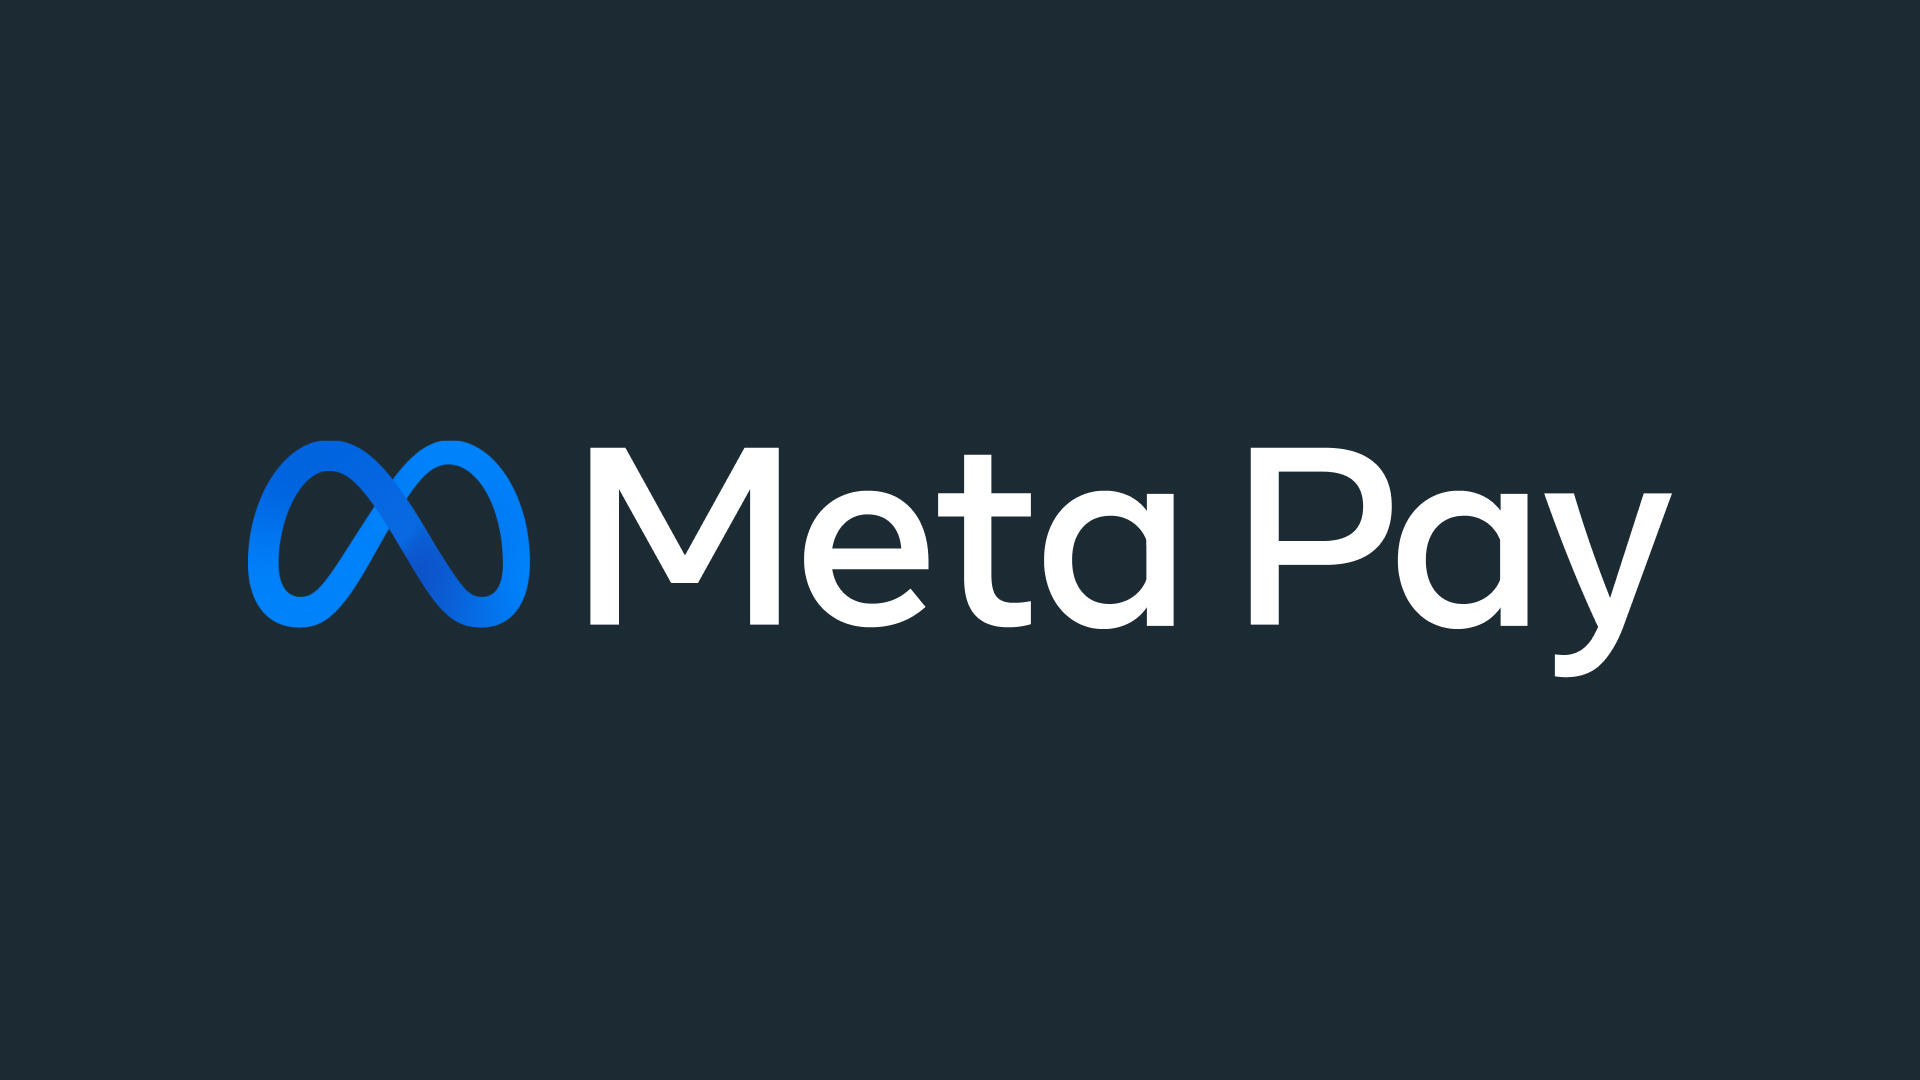 How Much Did Facebook Pay For Meta.Com